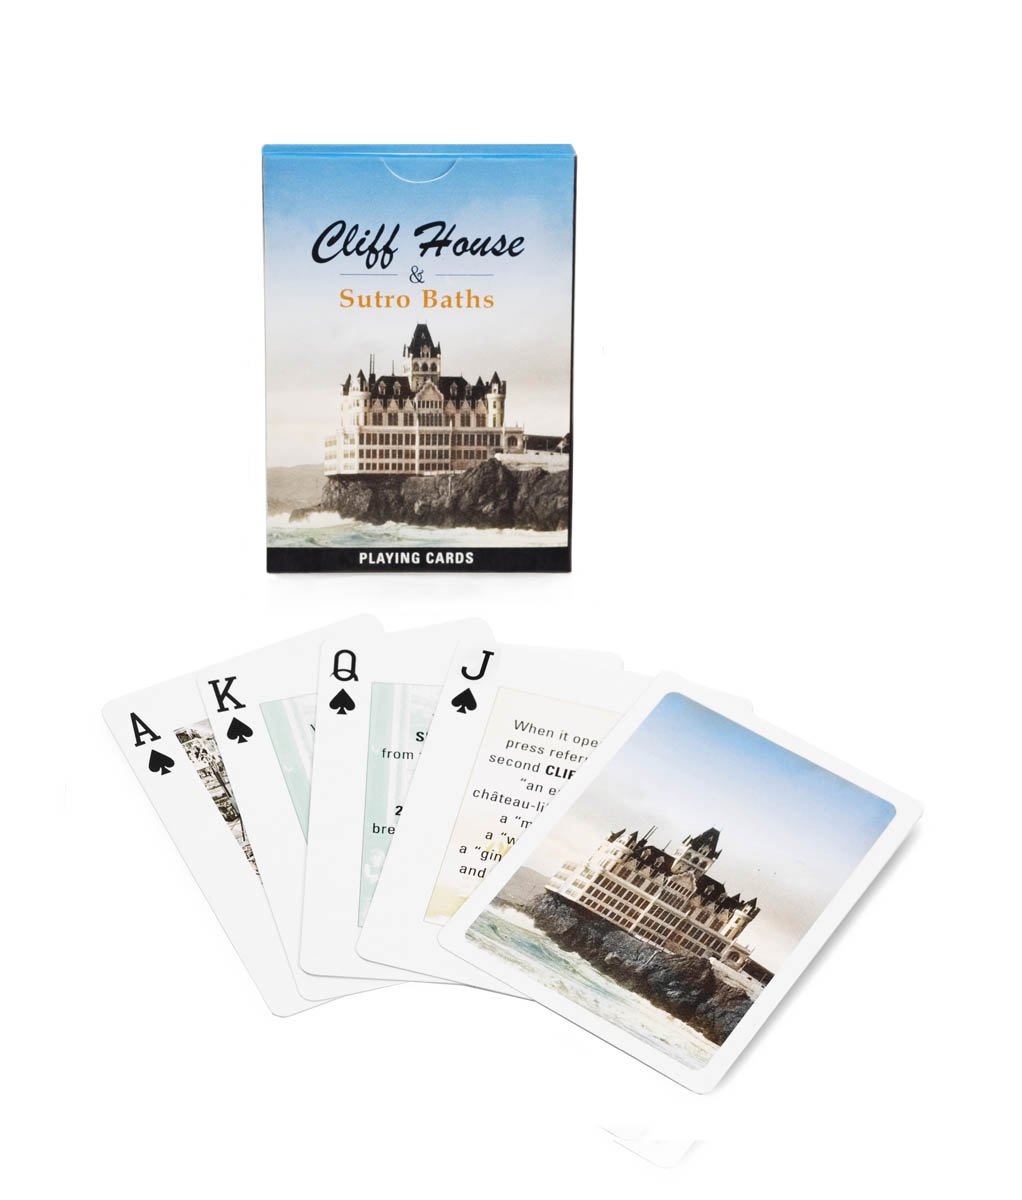 Cliff House and Sutro Baths playing cards, featuring fun facts and historical photographs of San Francisco's Lands End.